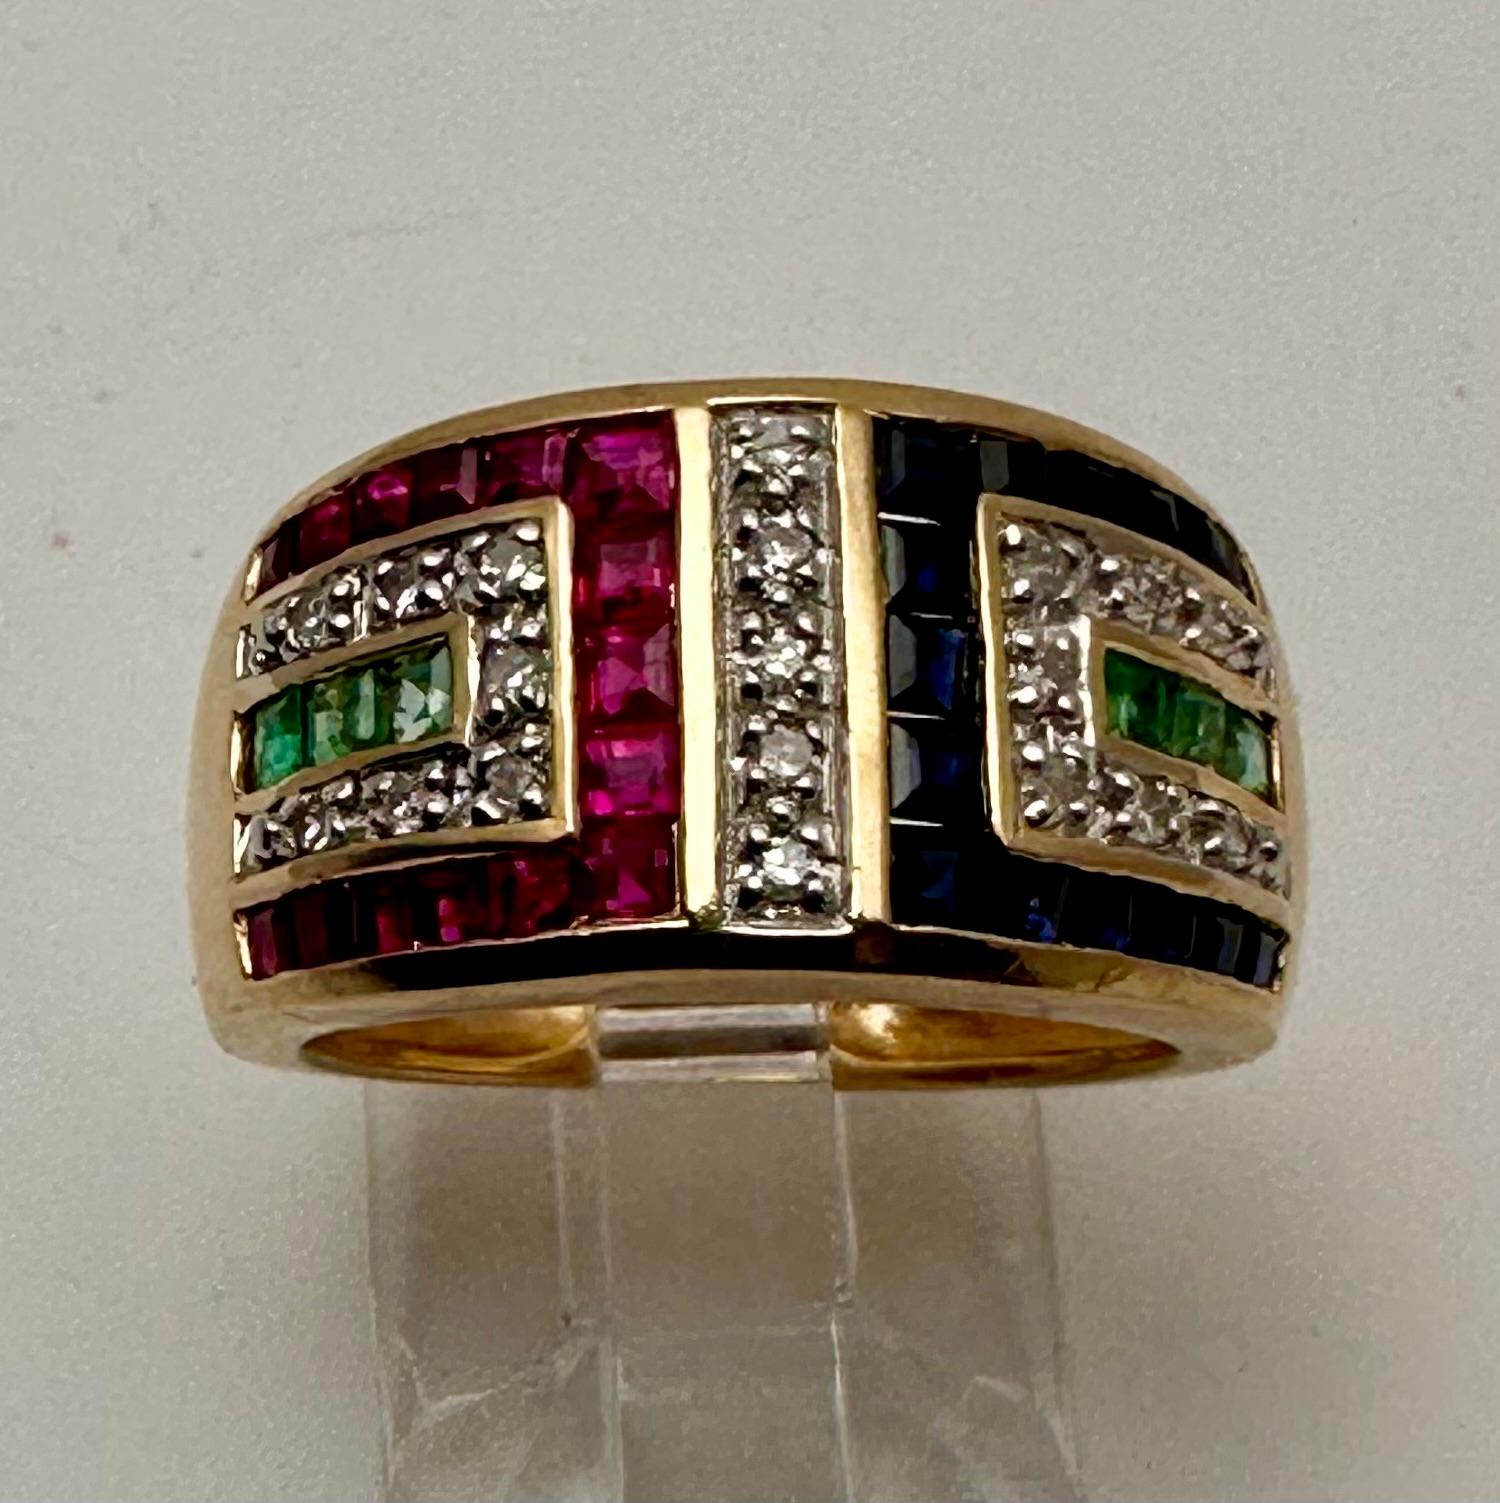 14k Yellow Gold 10.5 mm Wide Ruby Sapphire Diamond and Emerald Ring Size 6. Colored stones are princess cut and round diamonds.
RUBY
This vibrant, gem-like baby name is often associated with wealth, health, passion, and success in love, and derives